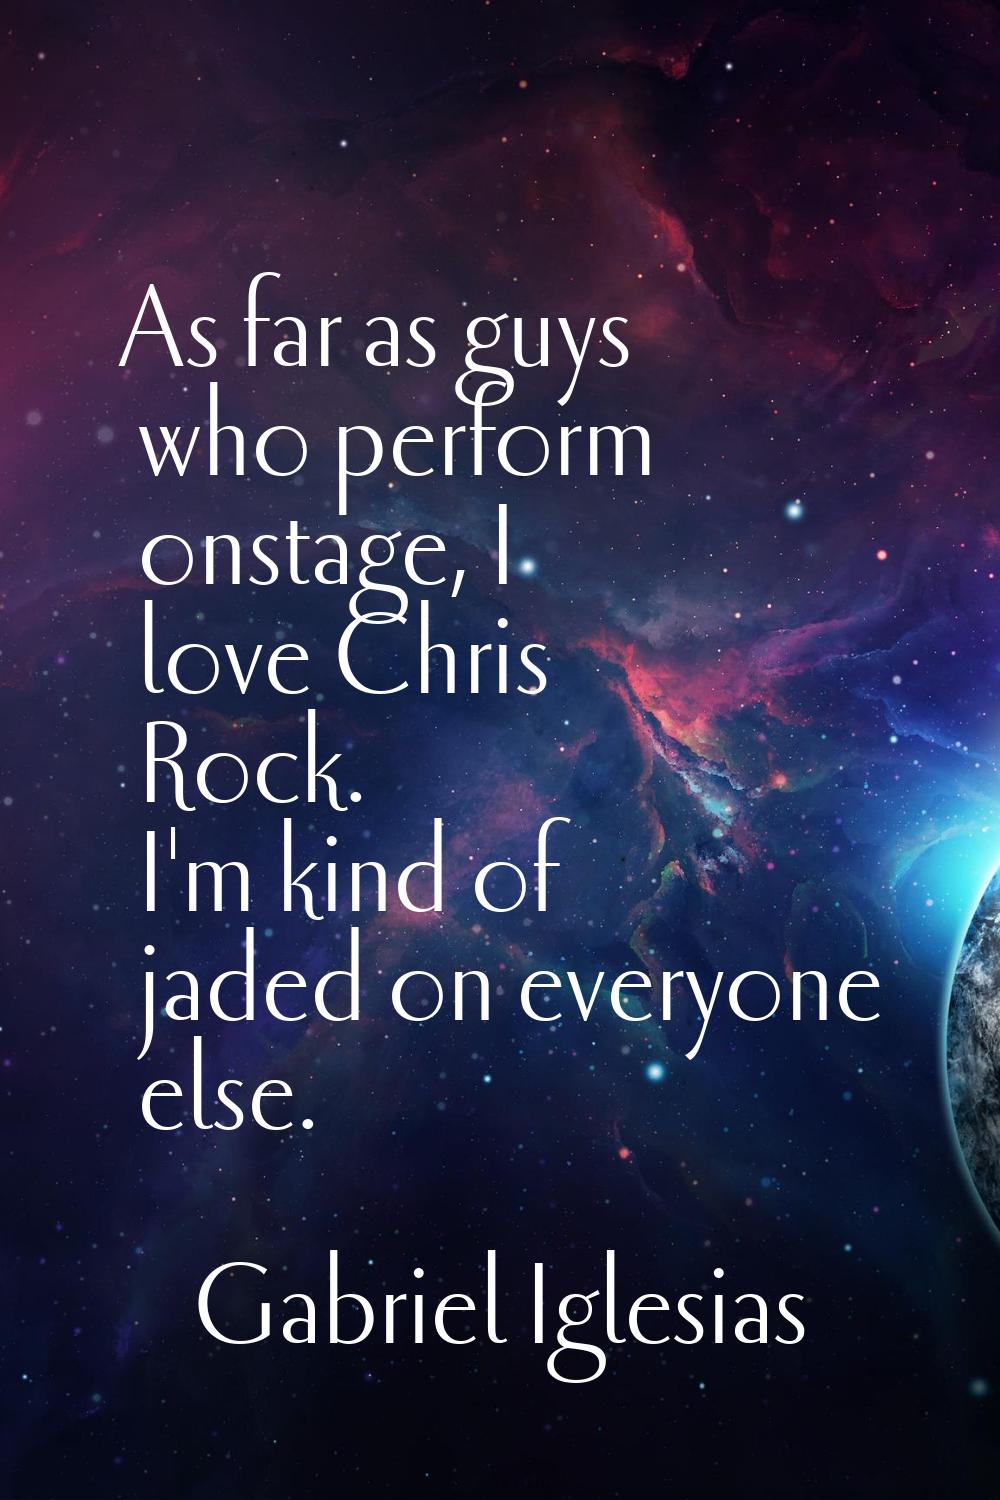 As far as guys who perform onstage, I love Chris Rock. I'm kind of jaded on everyone else.